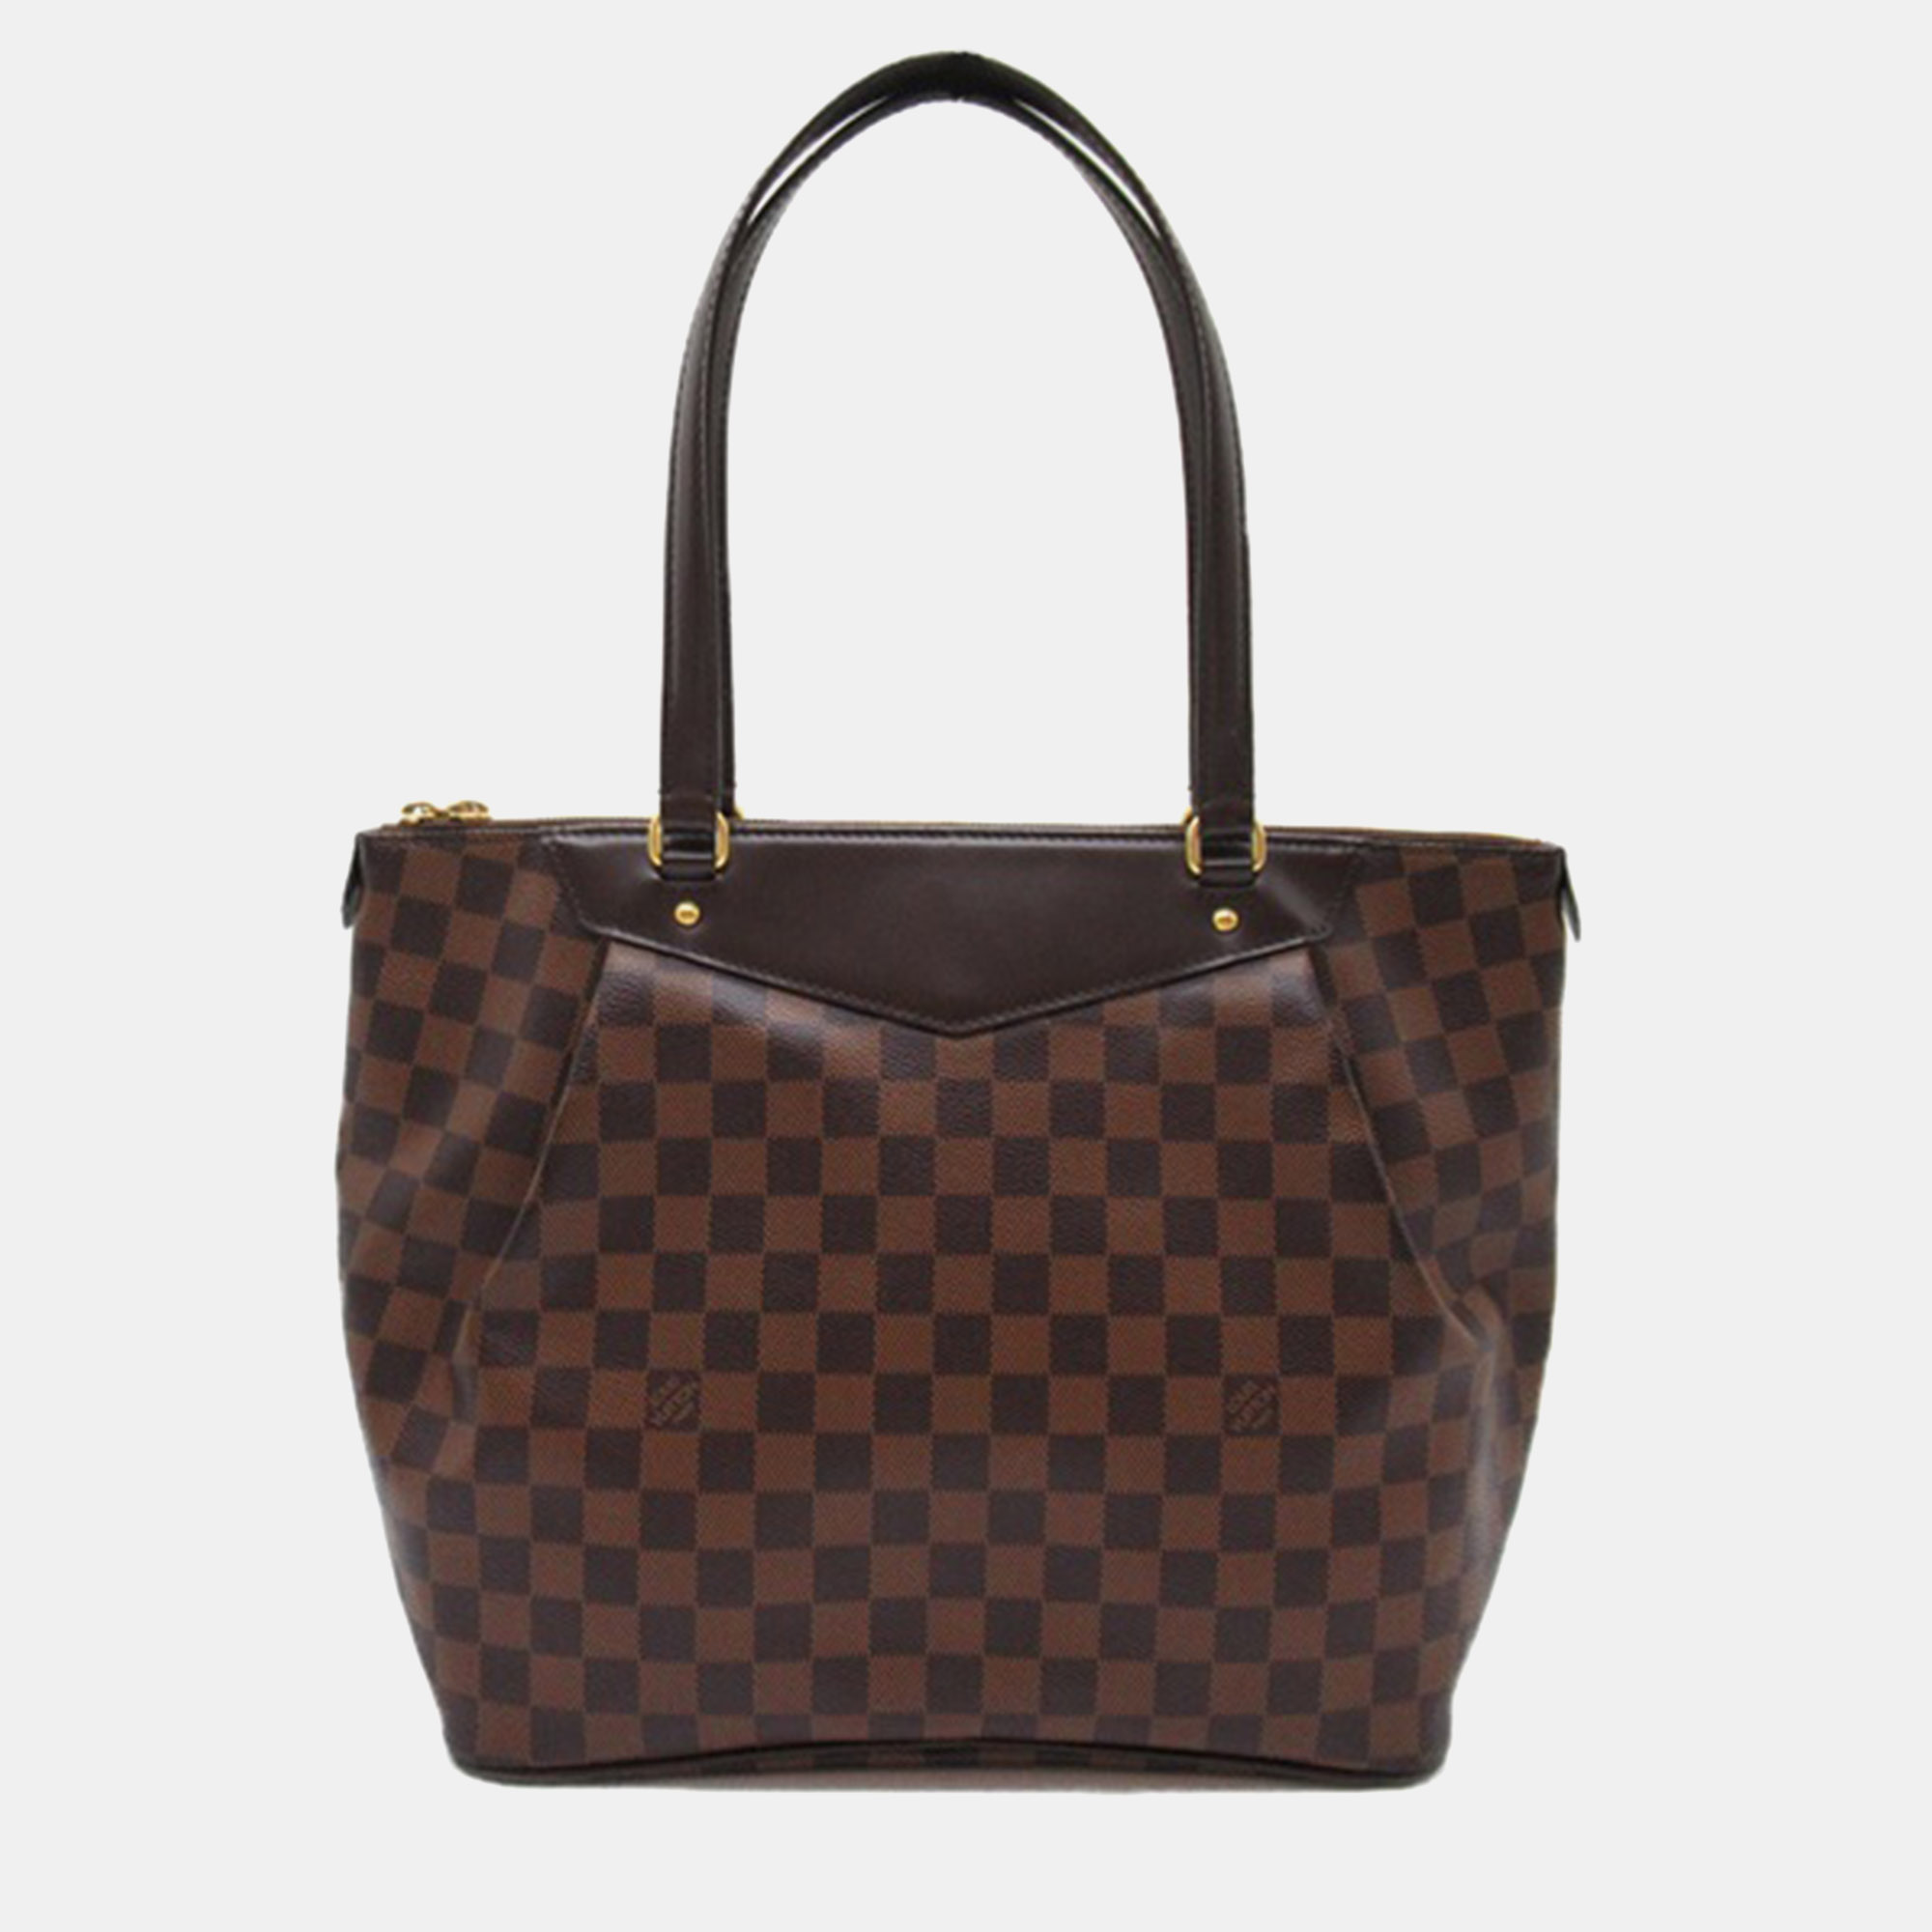 Louis vuitton brown damier ebene canvas westminister gm tote bag